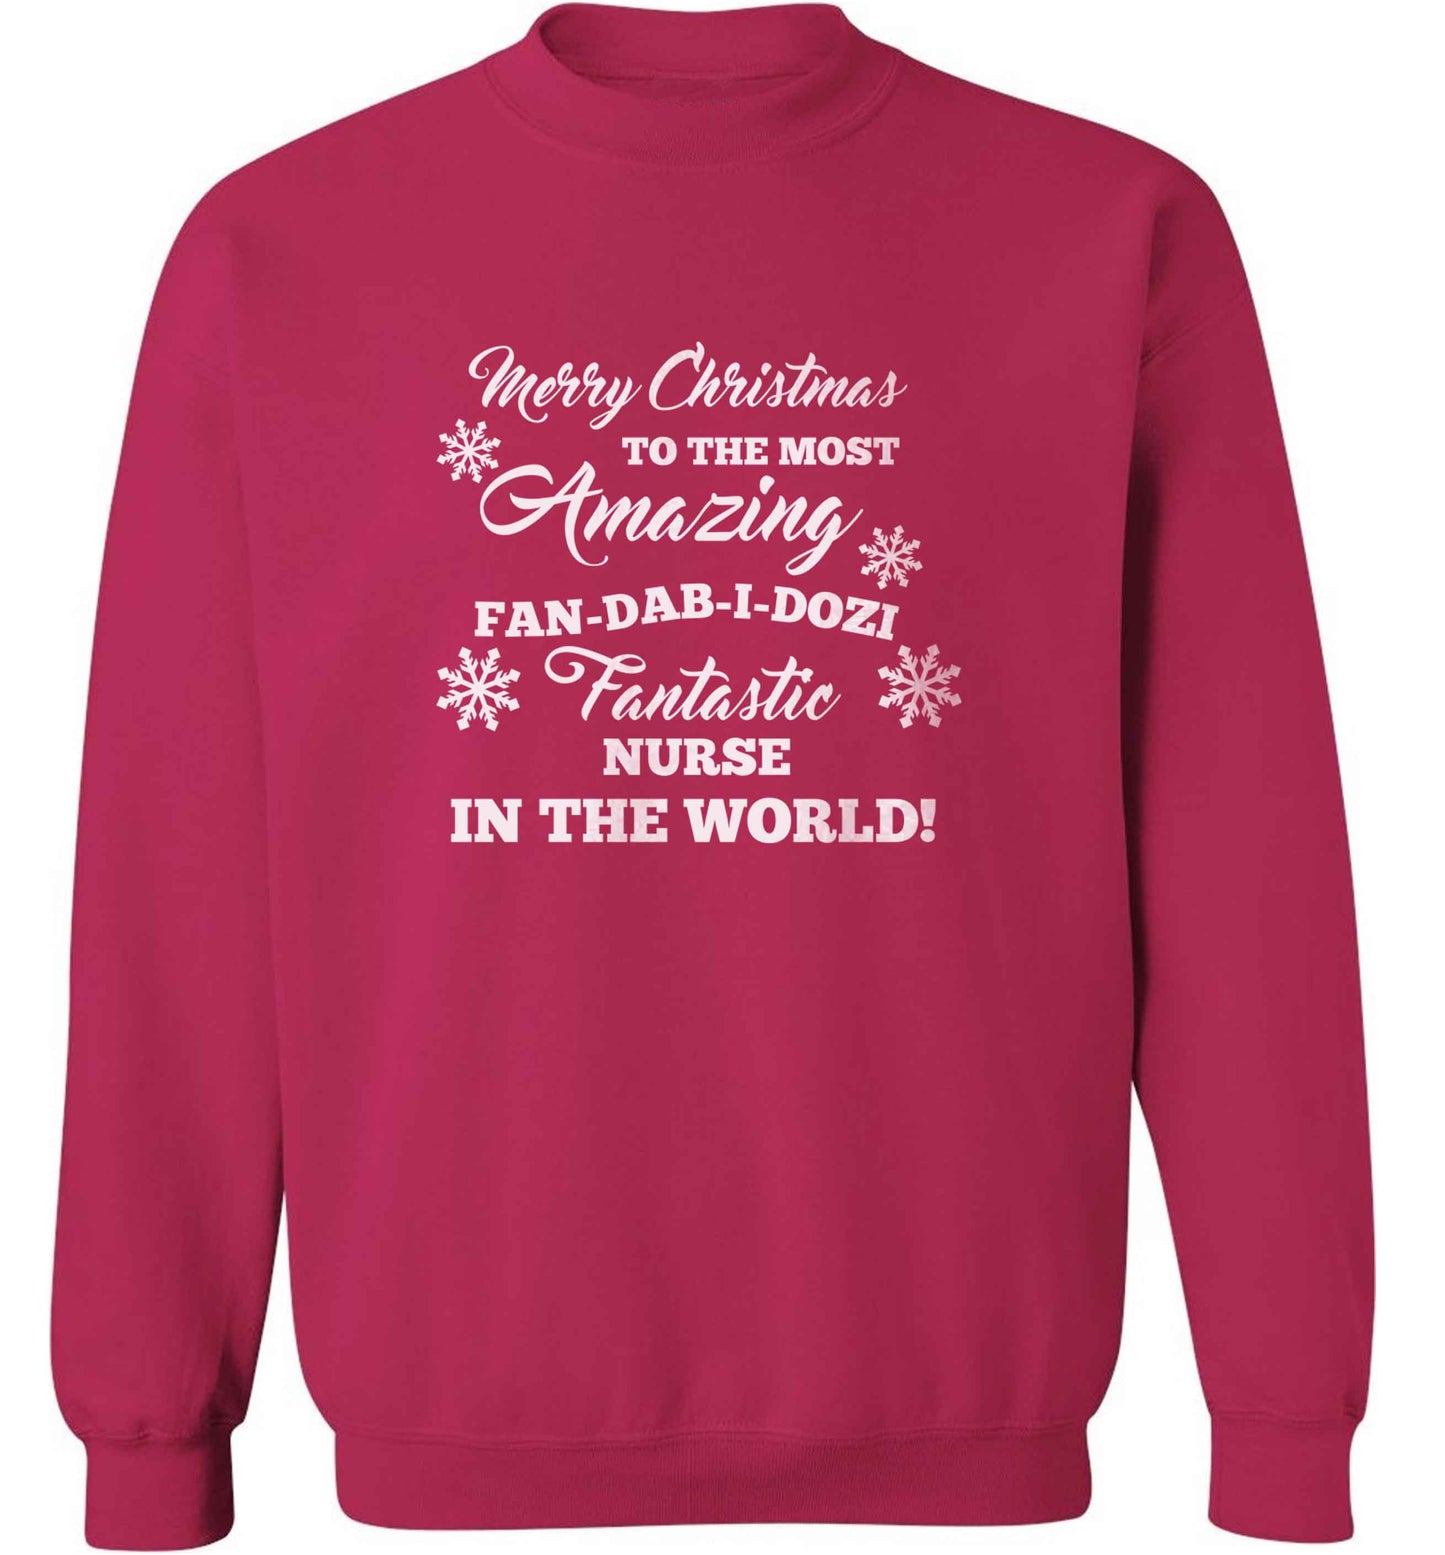 Merry Christmas to the most amazing nurse in the world! adult's unisex pink sweater 2XL